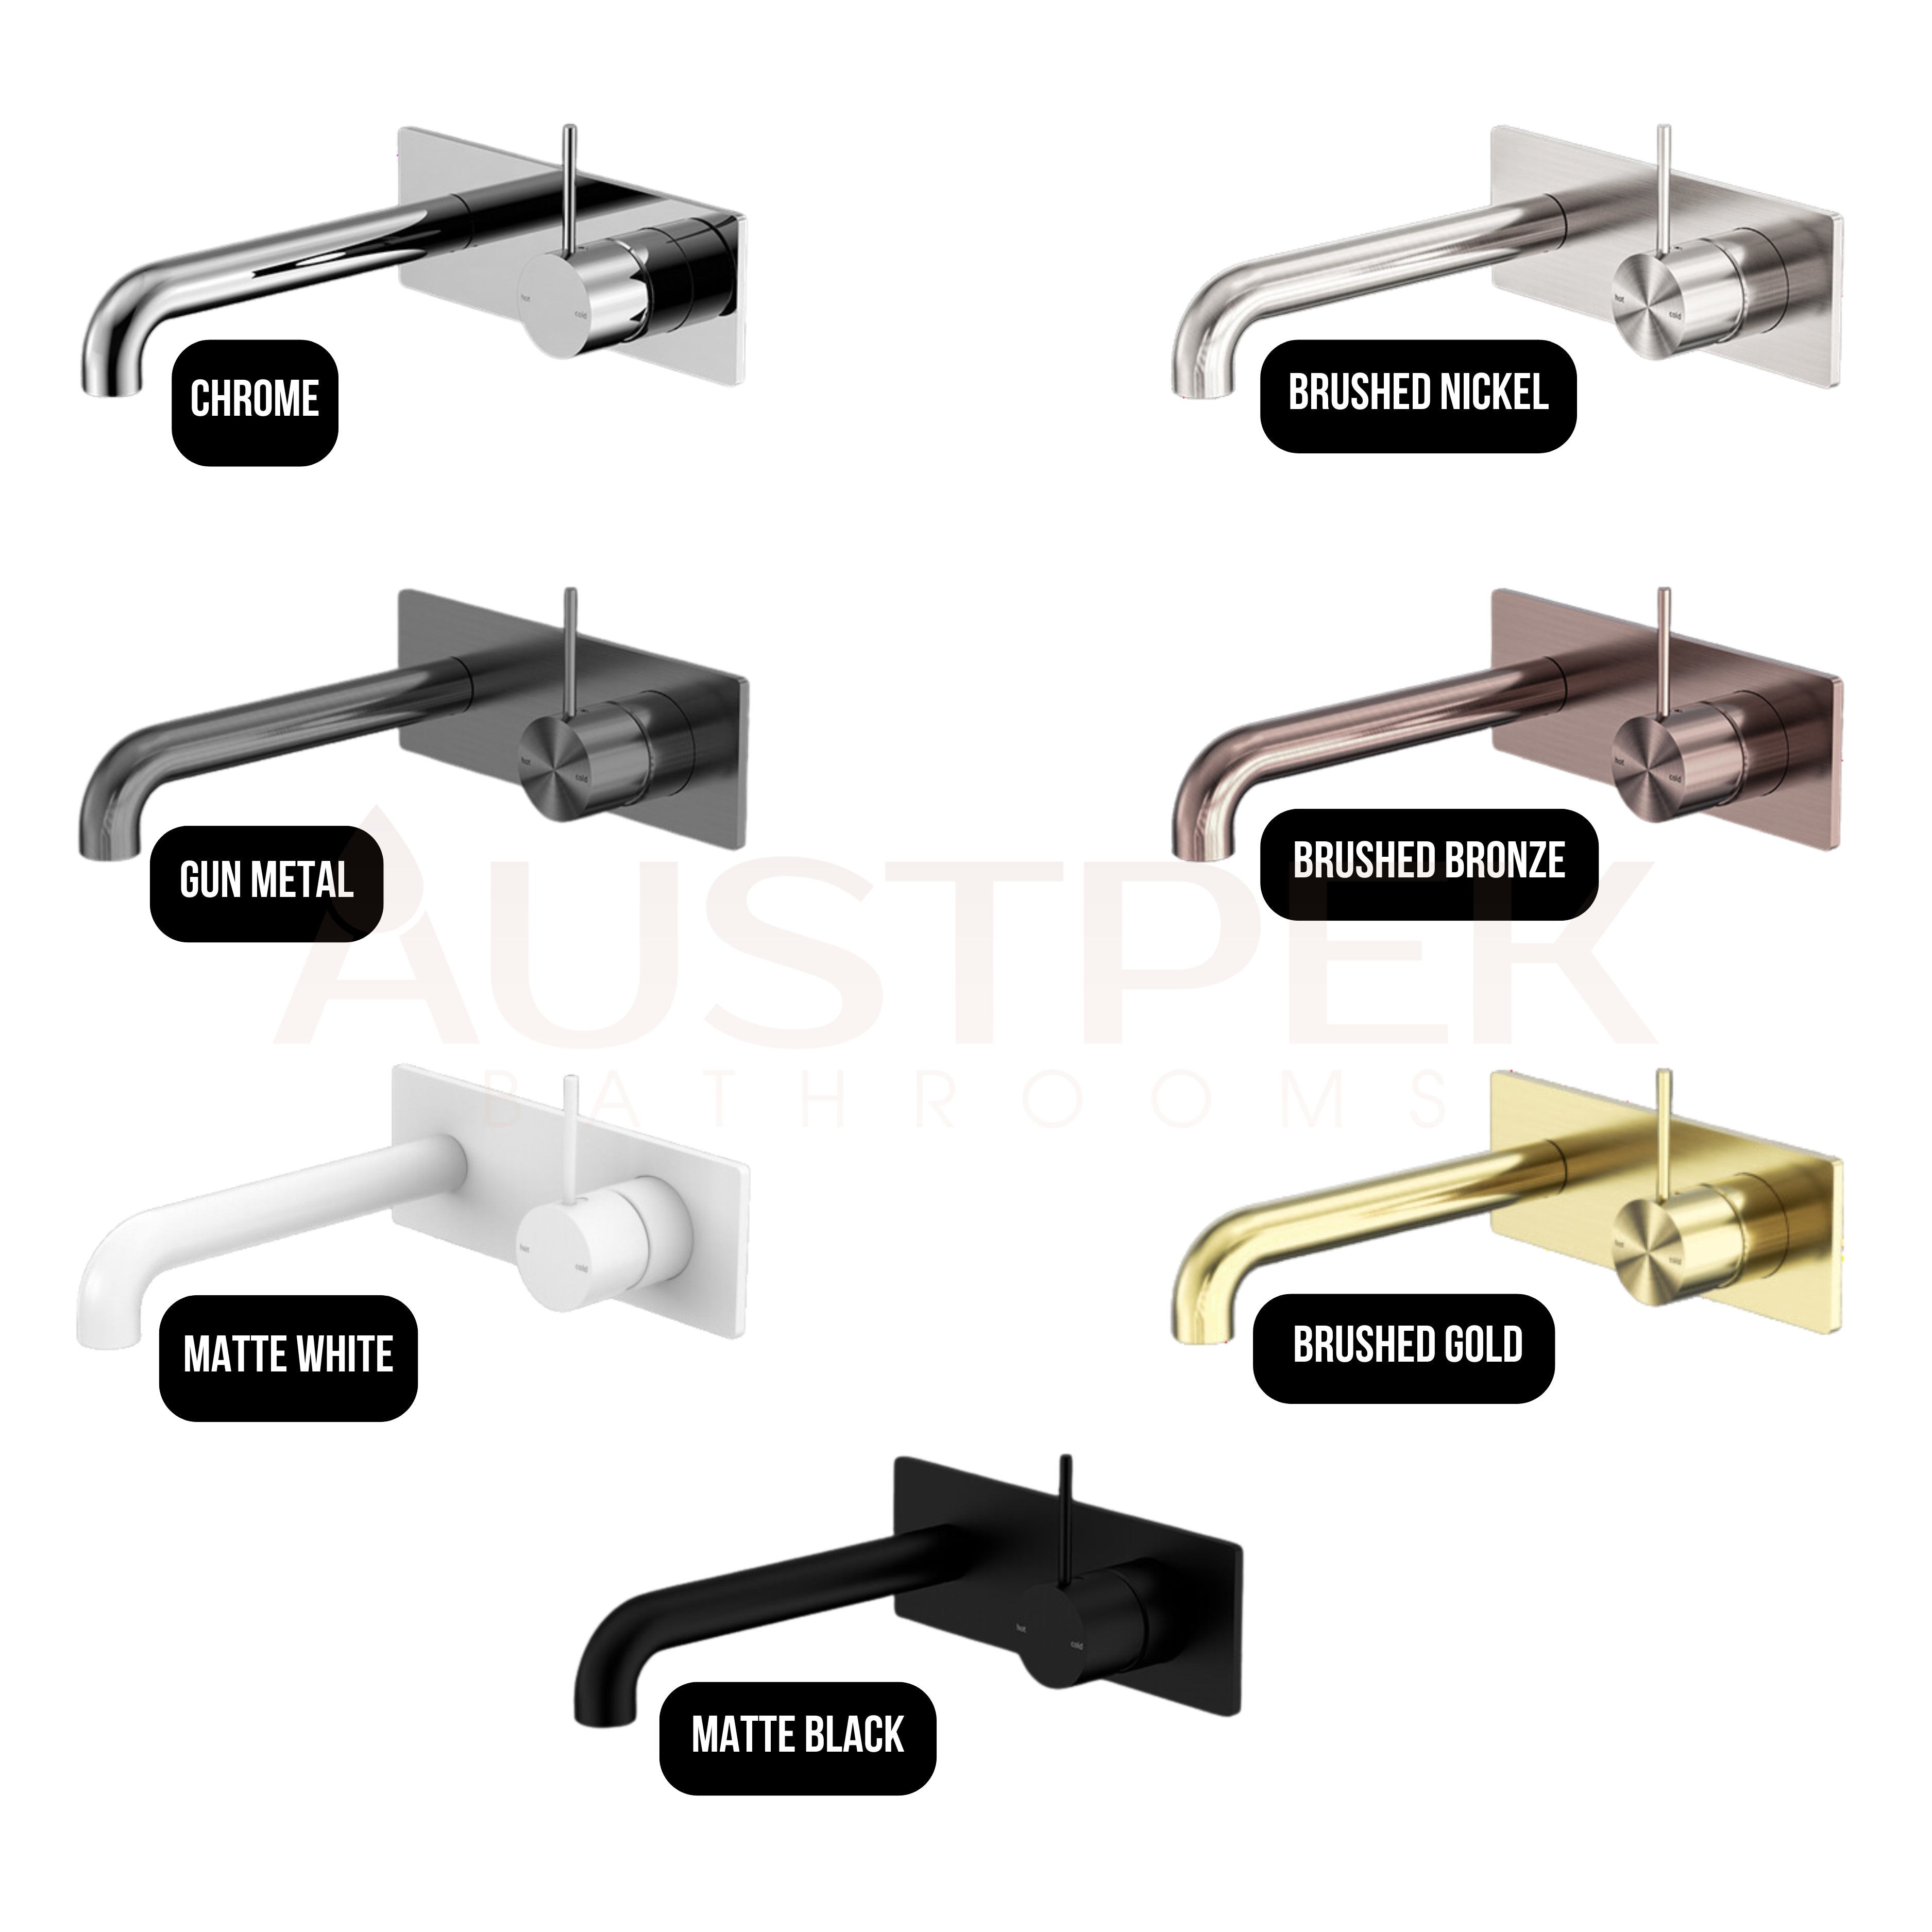 NERO MECCA WALL BASIN/ BATH MIXER HANDLE UP BRUSHED BRONZE (AVAILABLE IN 120MM,160MM,185MM, 230MM AND 260MM)